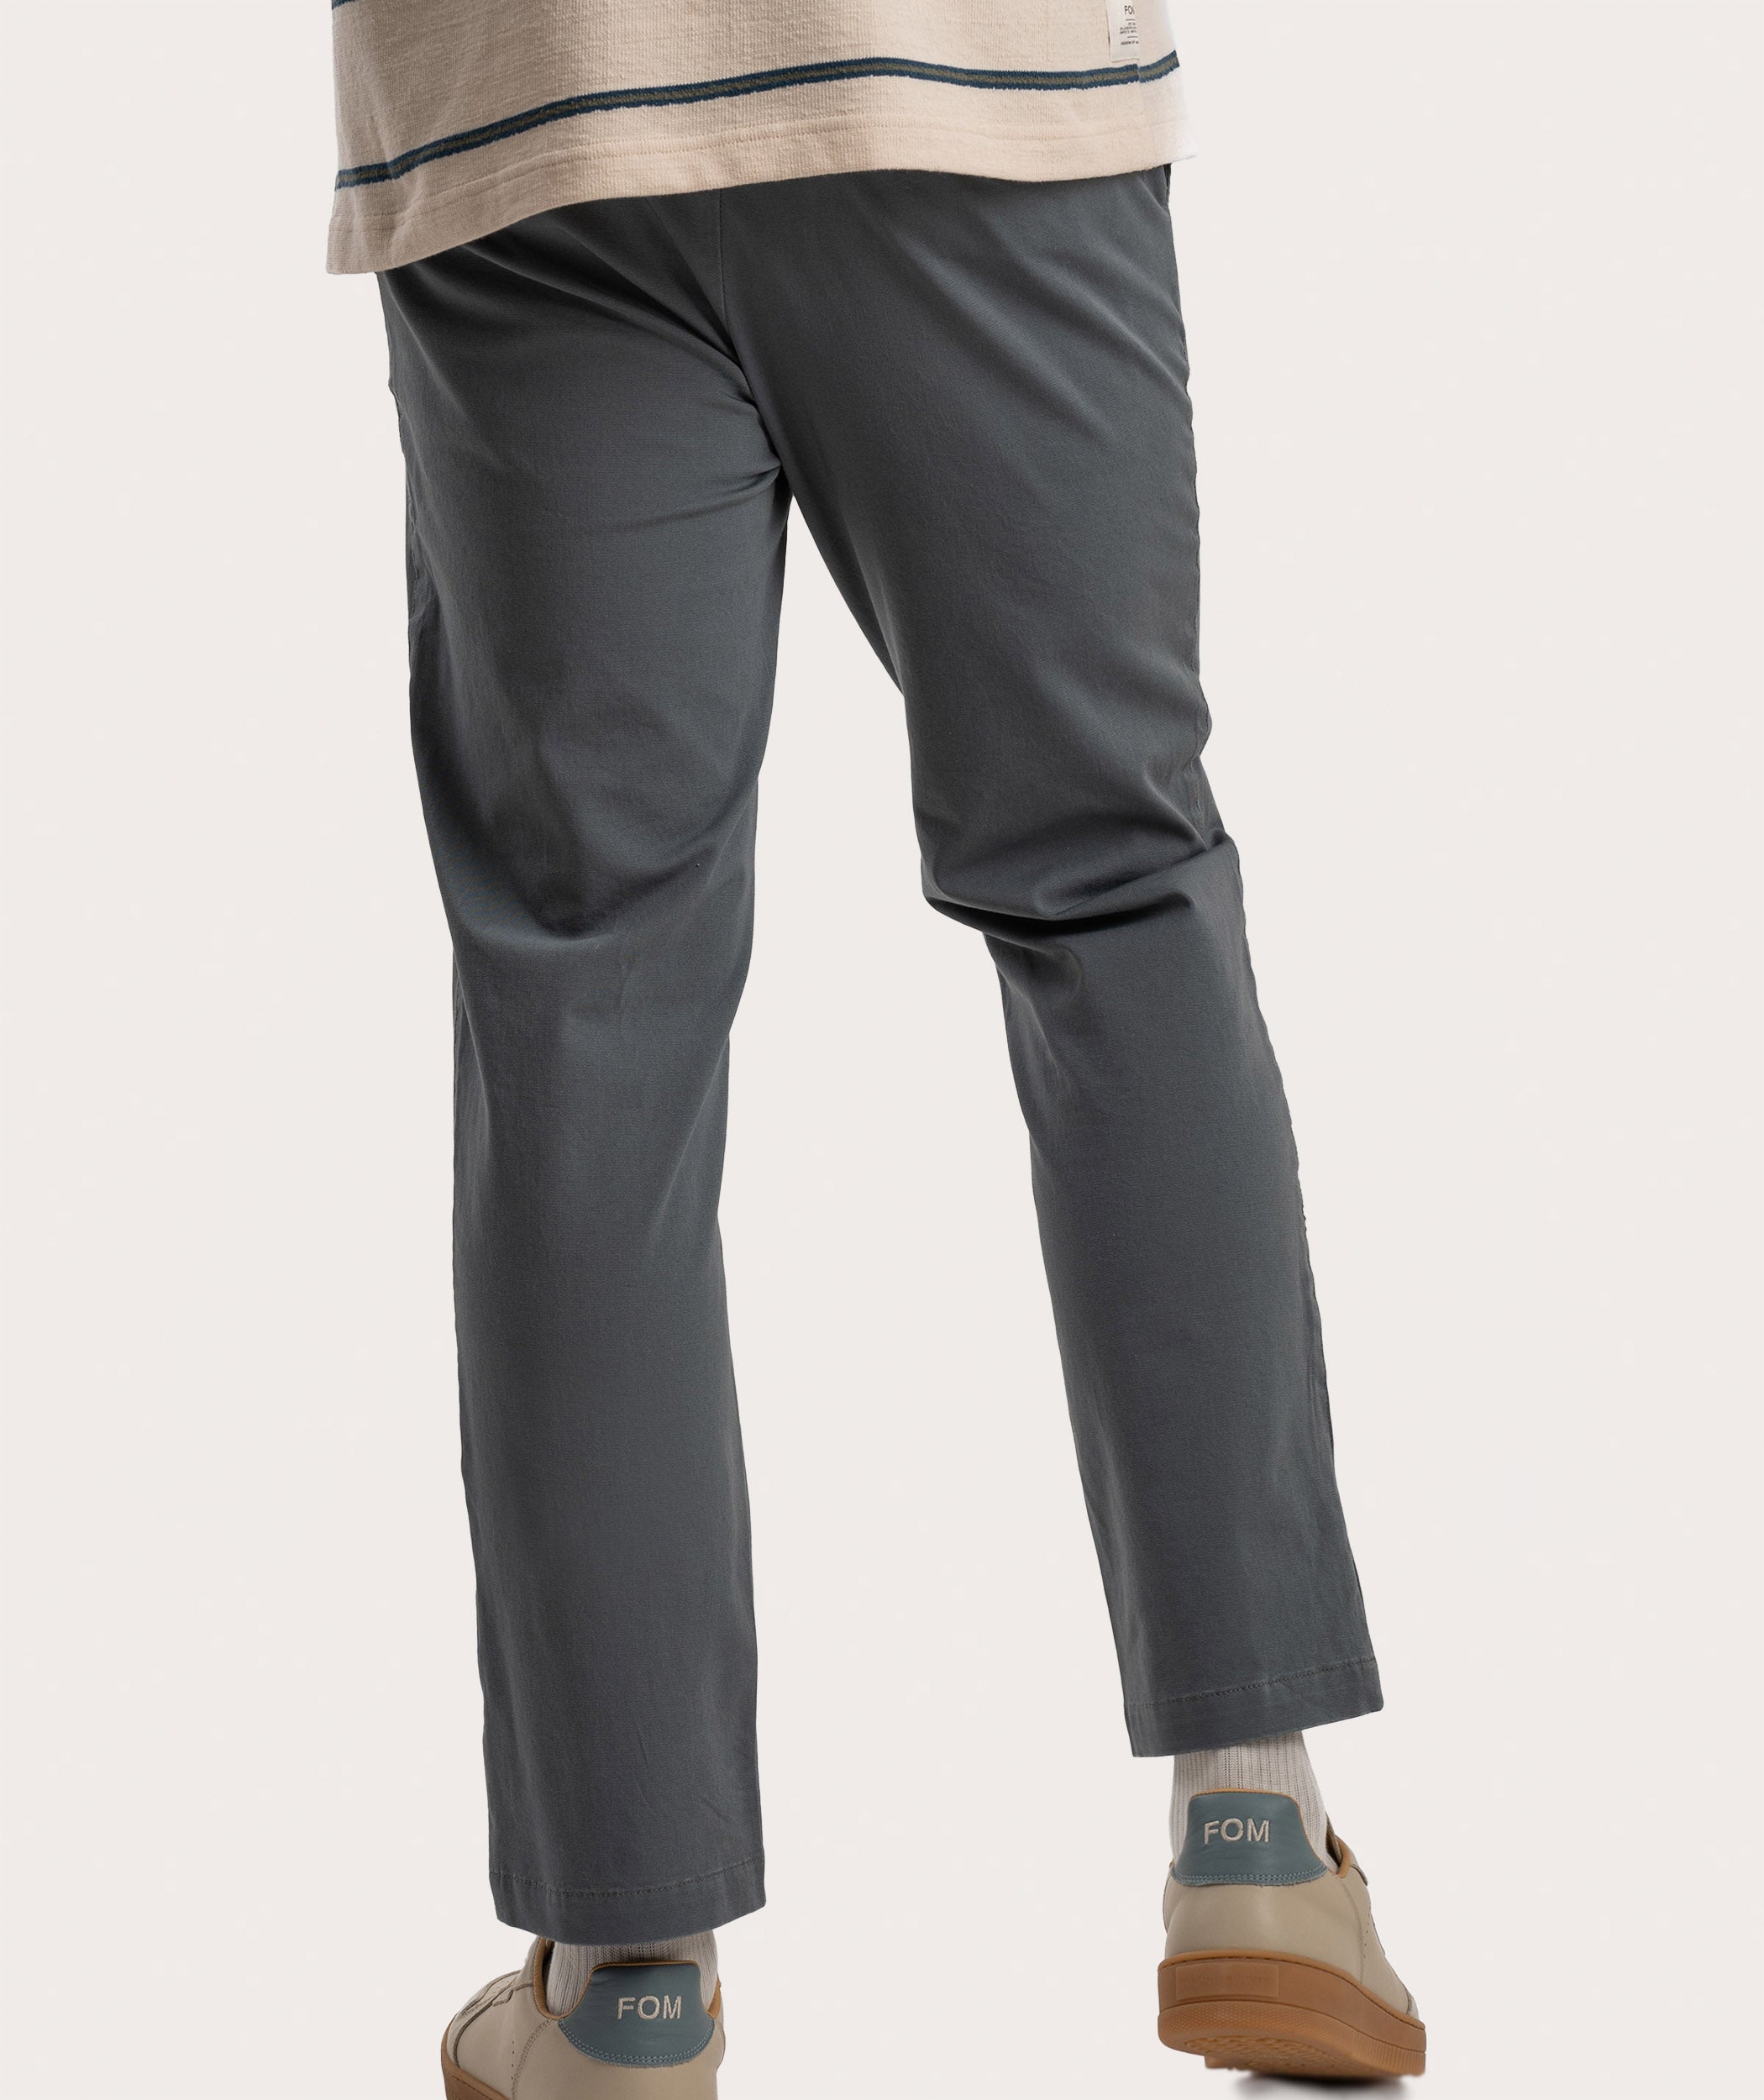 Mens Classic Slim Fit Chino - Dusty Olive